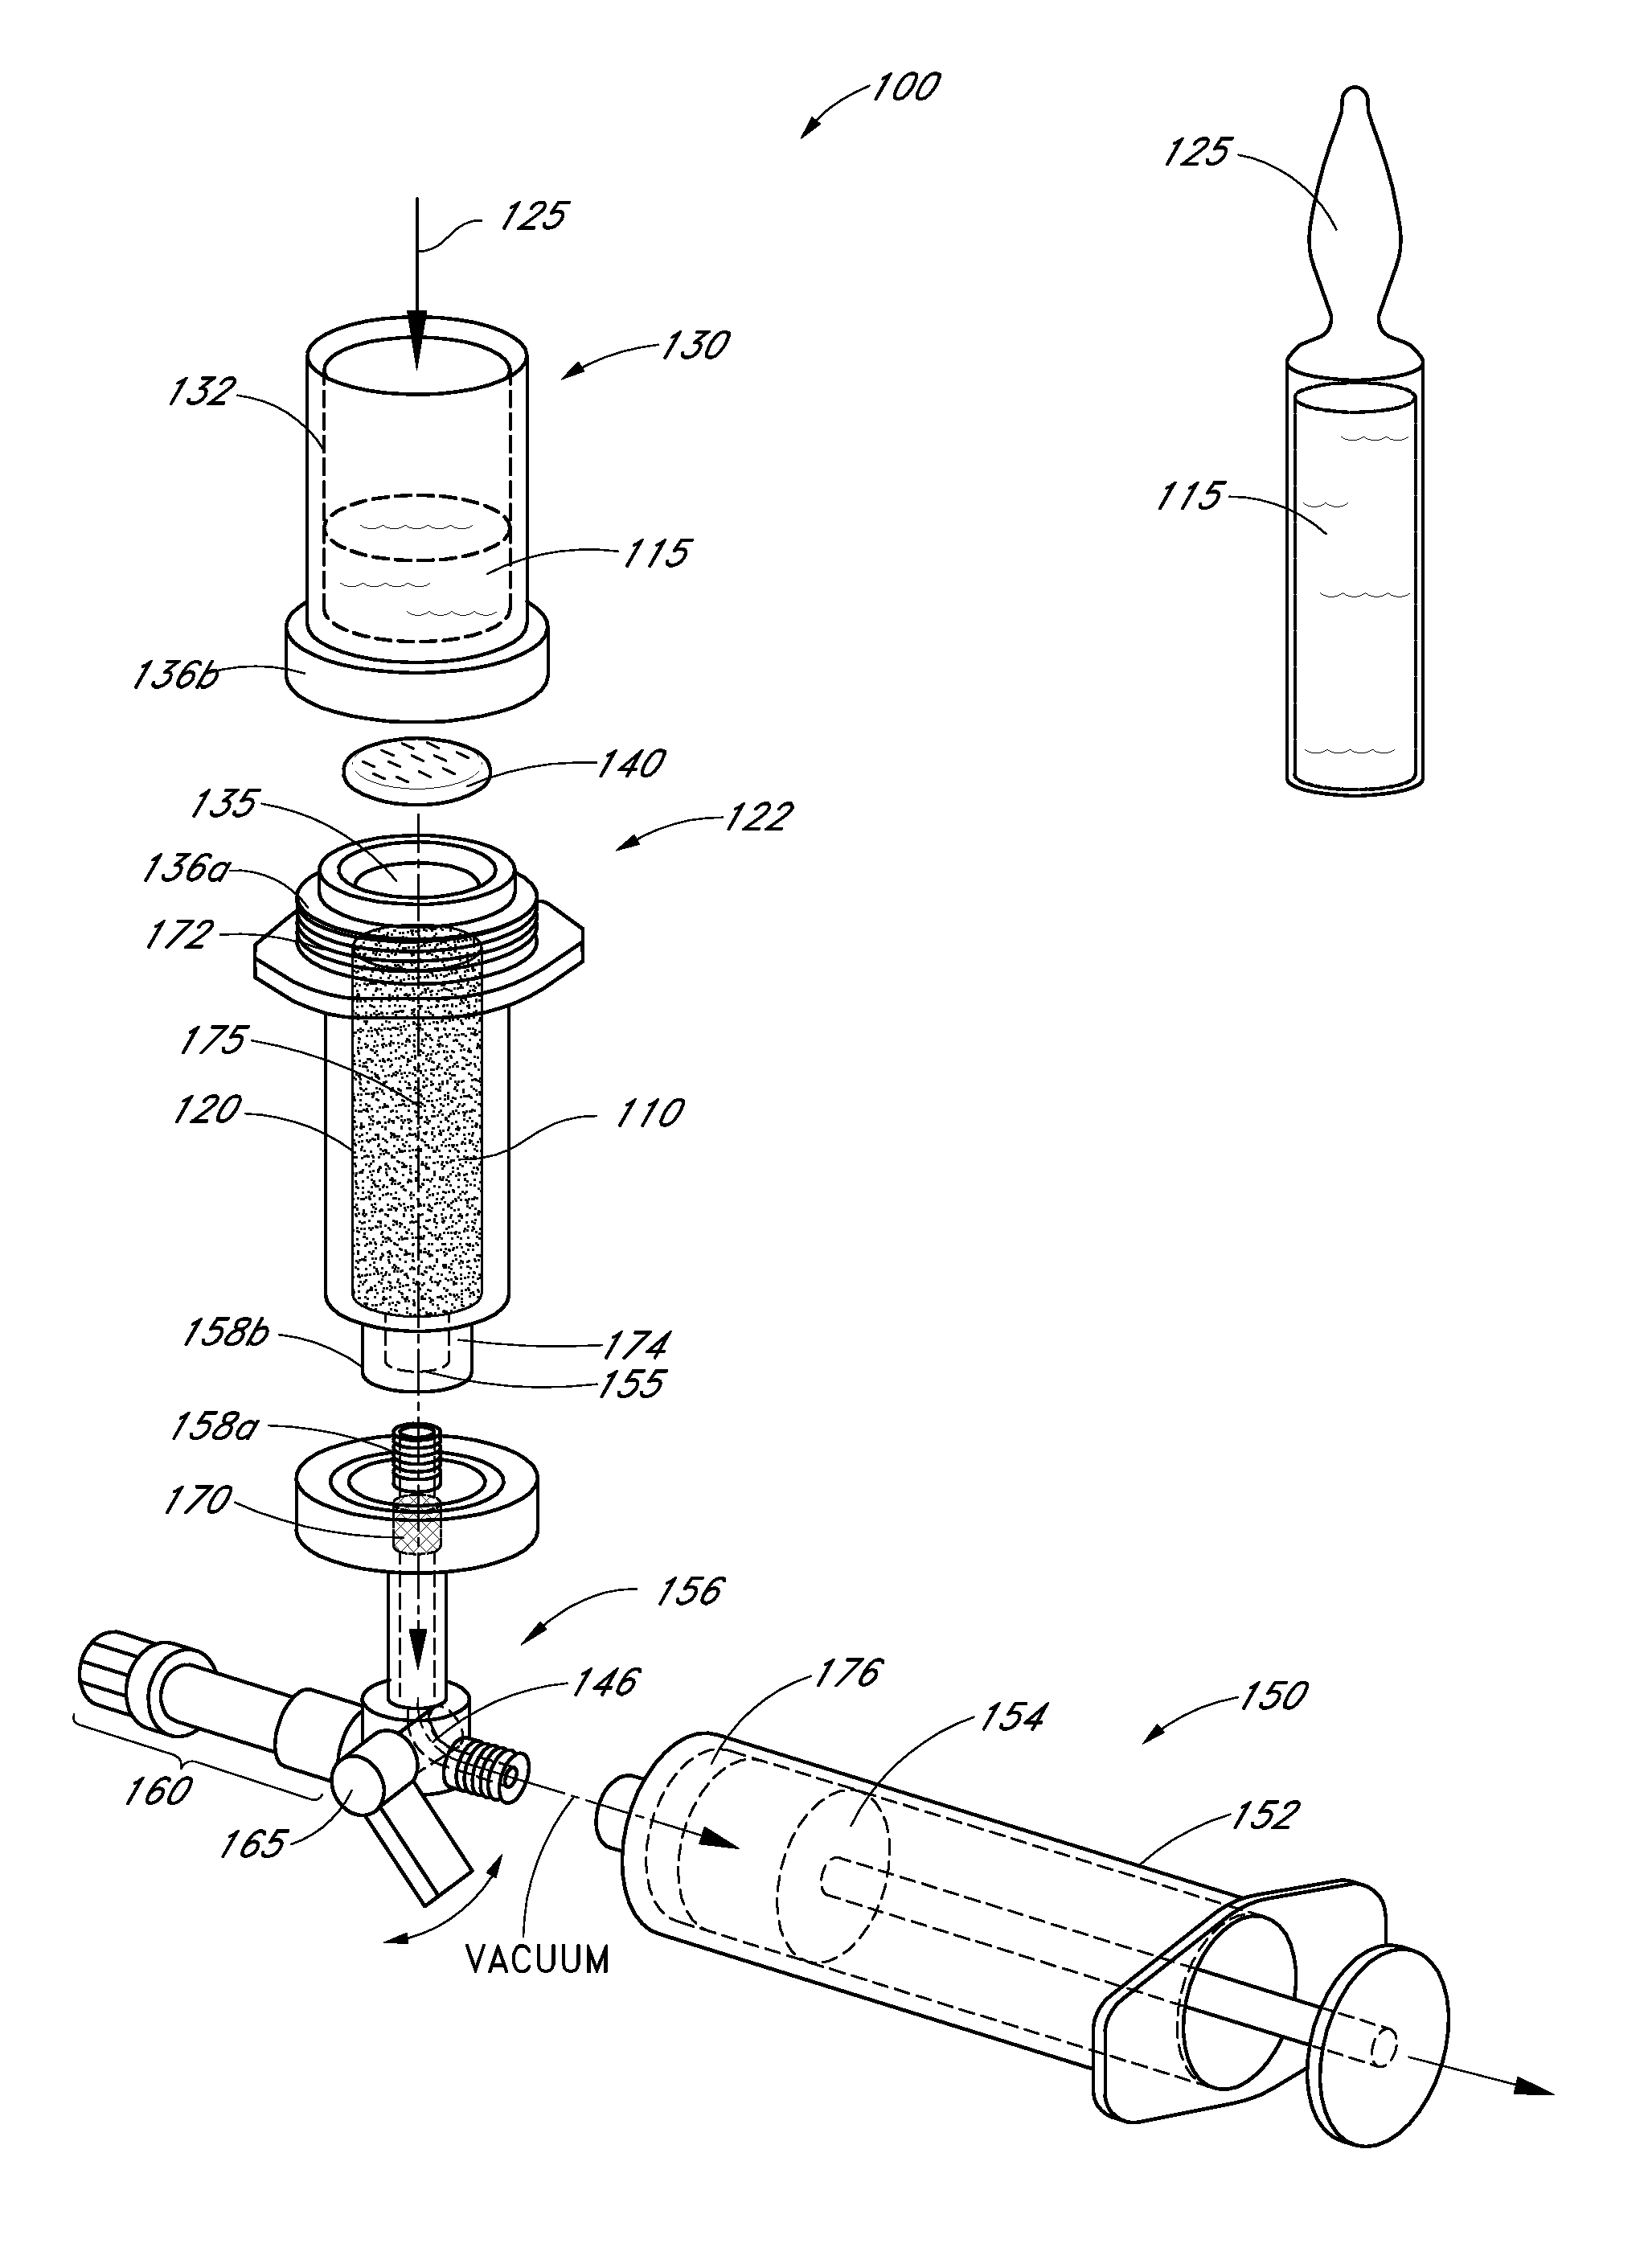 System for use in bone cement preparation and delivery